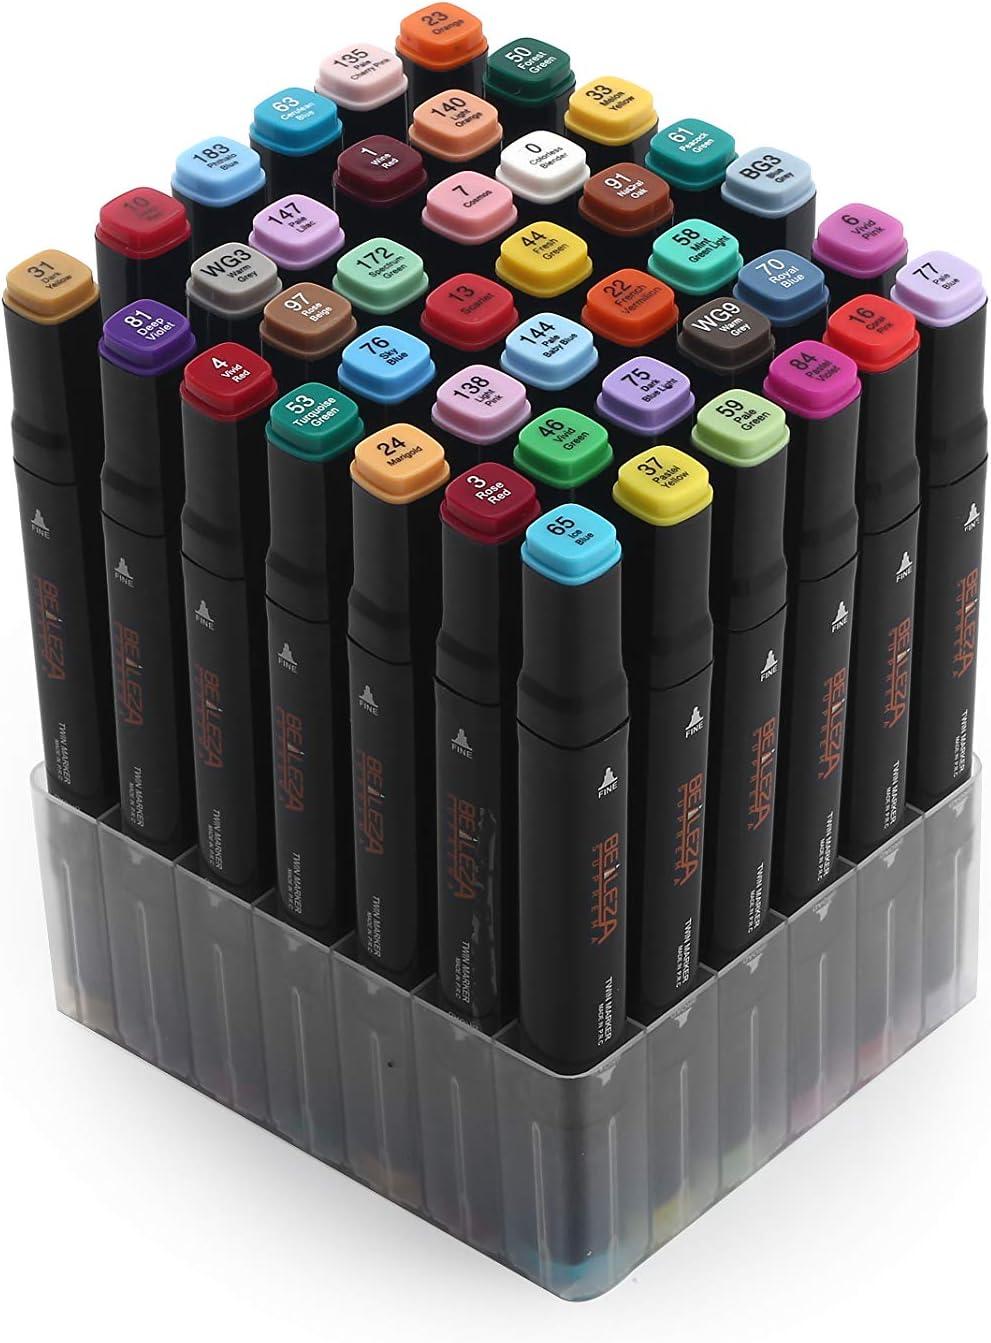 100 Markers Artist Set Set of 100 Marker Pens, Twin Dual Tips Sketch, Ciao,  Manga, Anime, Drawing, Adult Book Coloring, Bible Journaling 